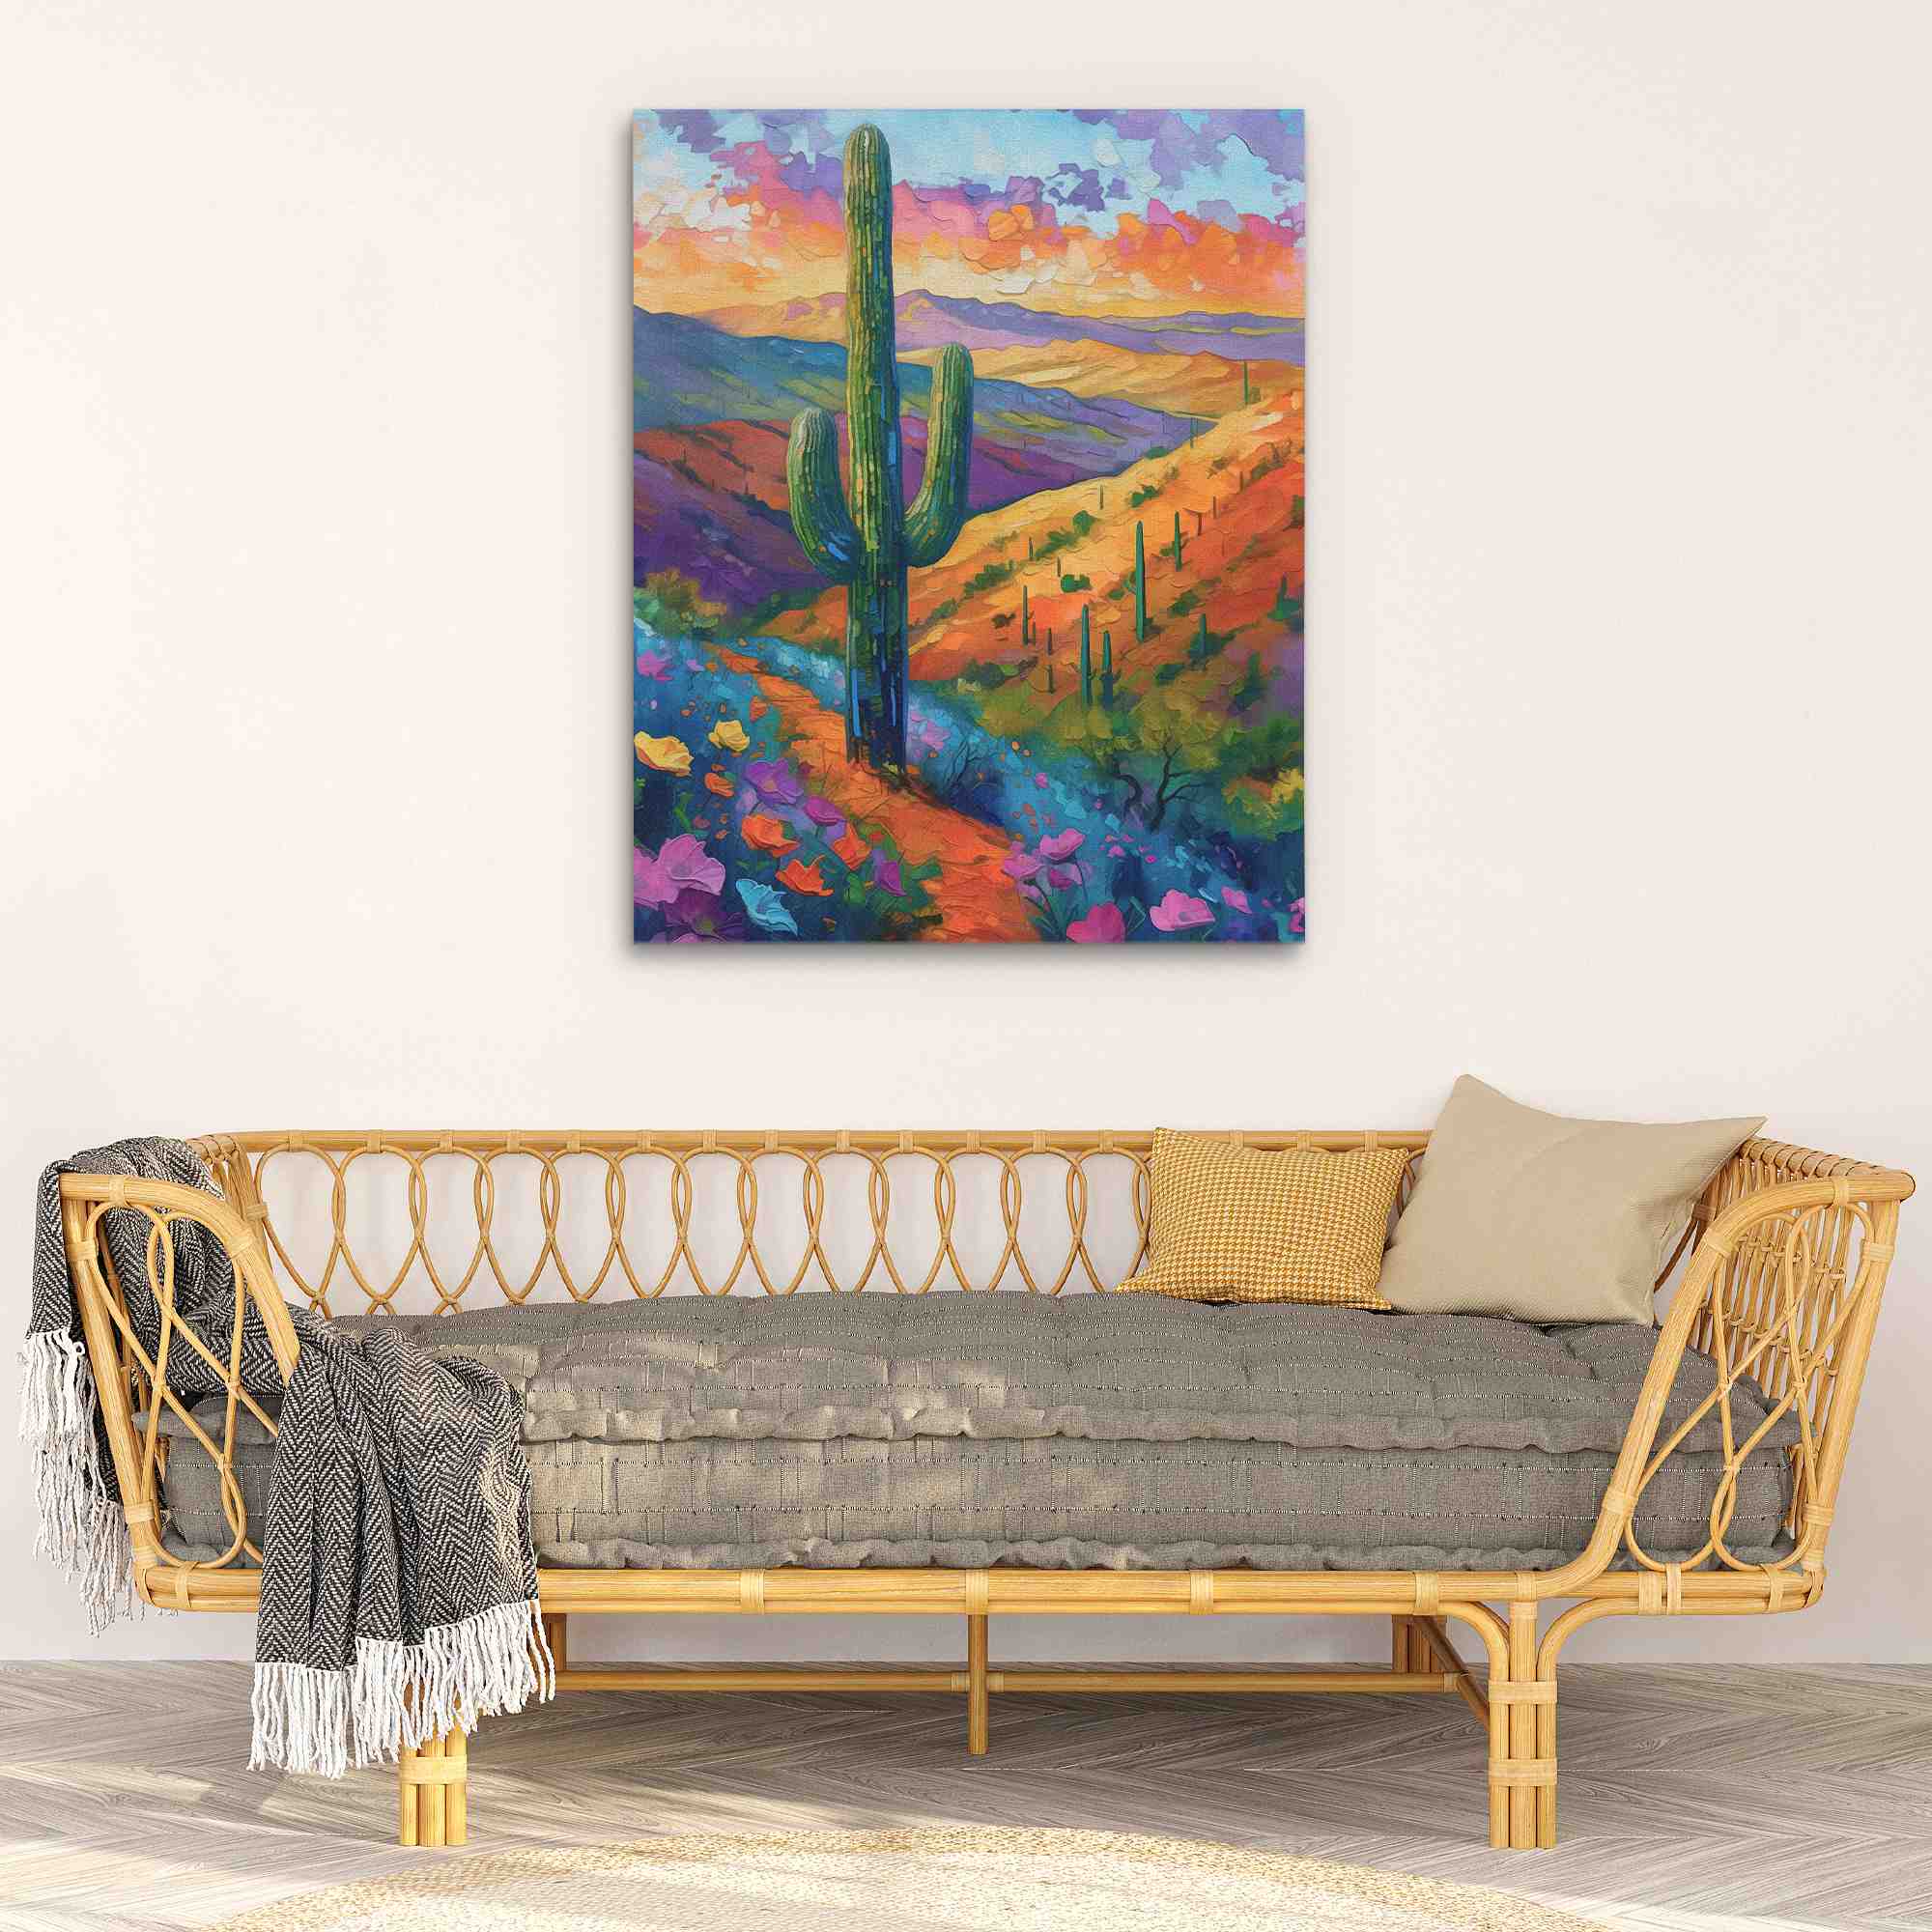 a painting of a cactus in the desert